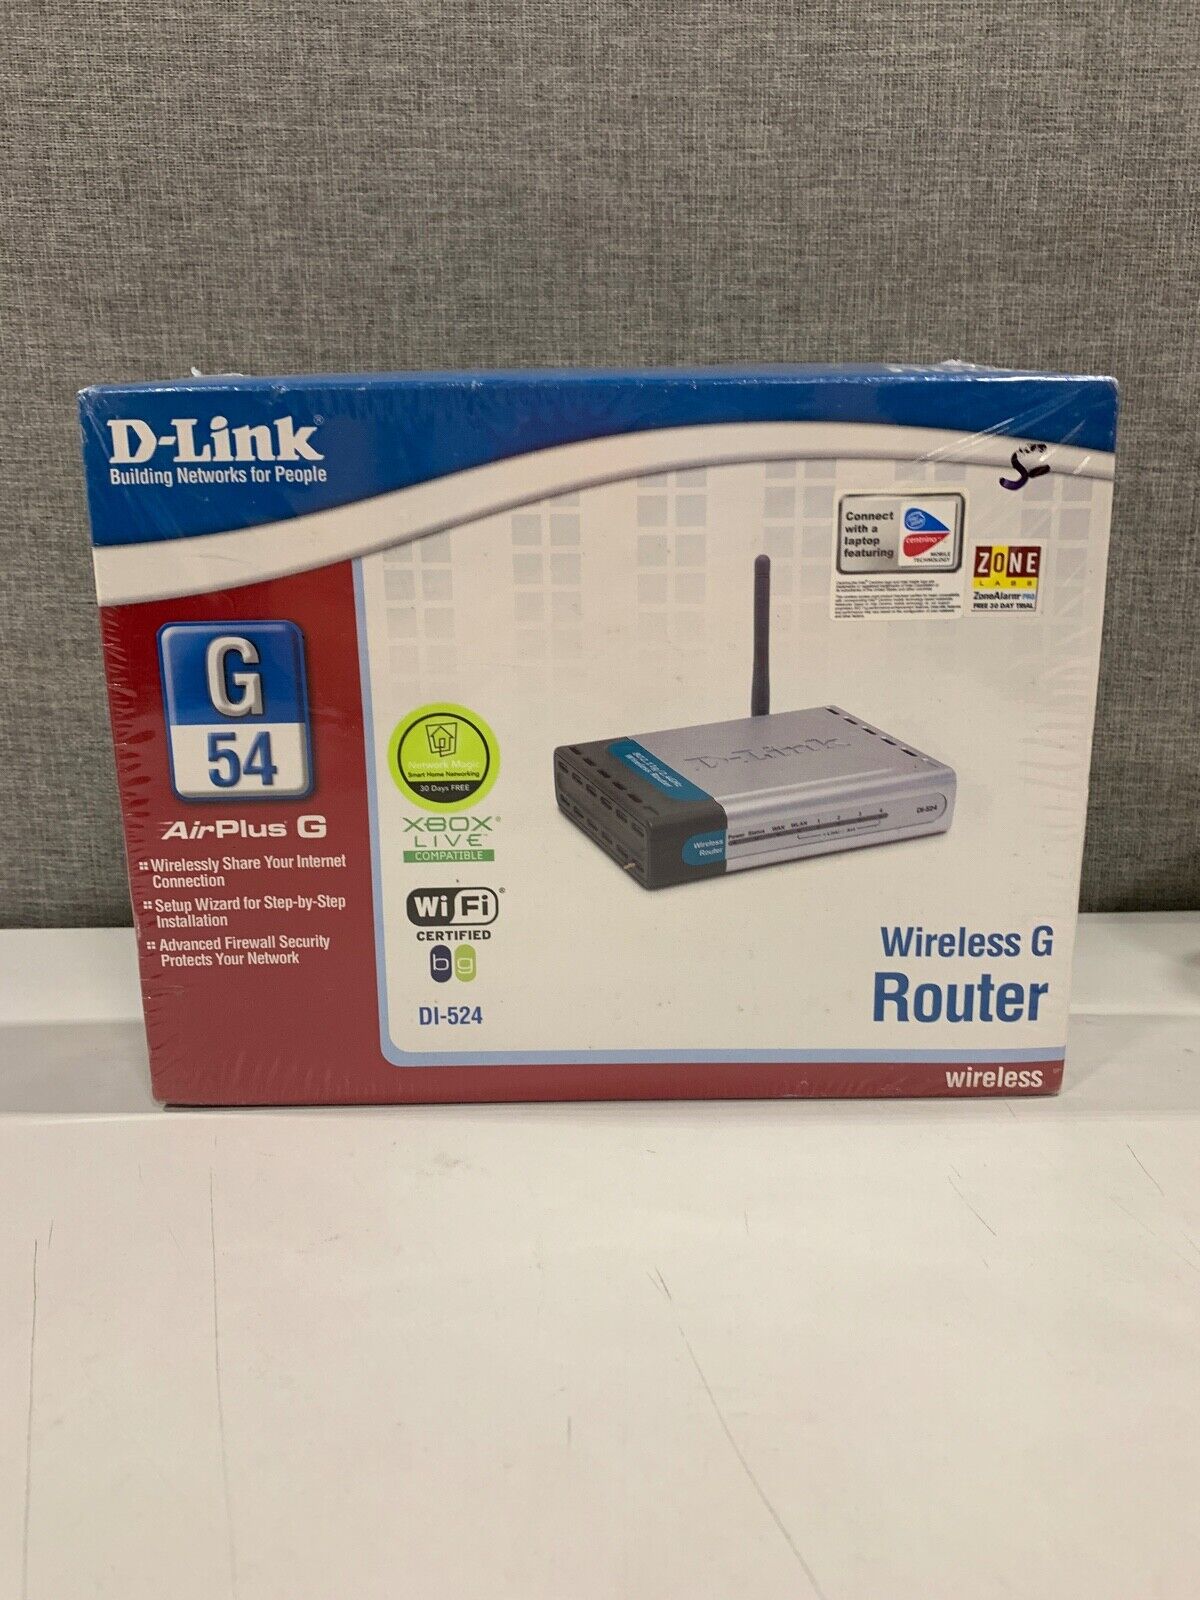 NEW D-Link DI-524 Wireless 54 Mbps High Speed Router 802.11g AirPlus G